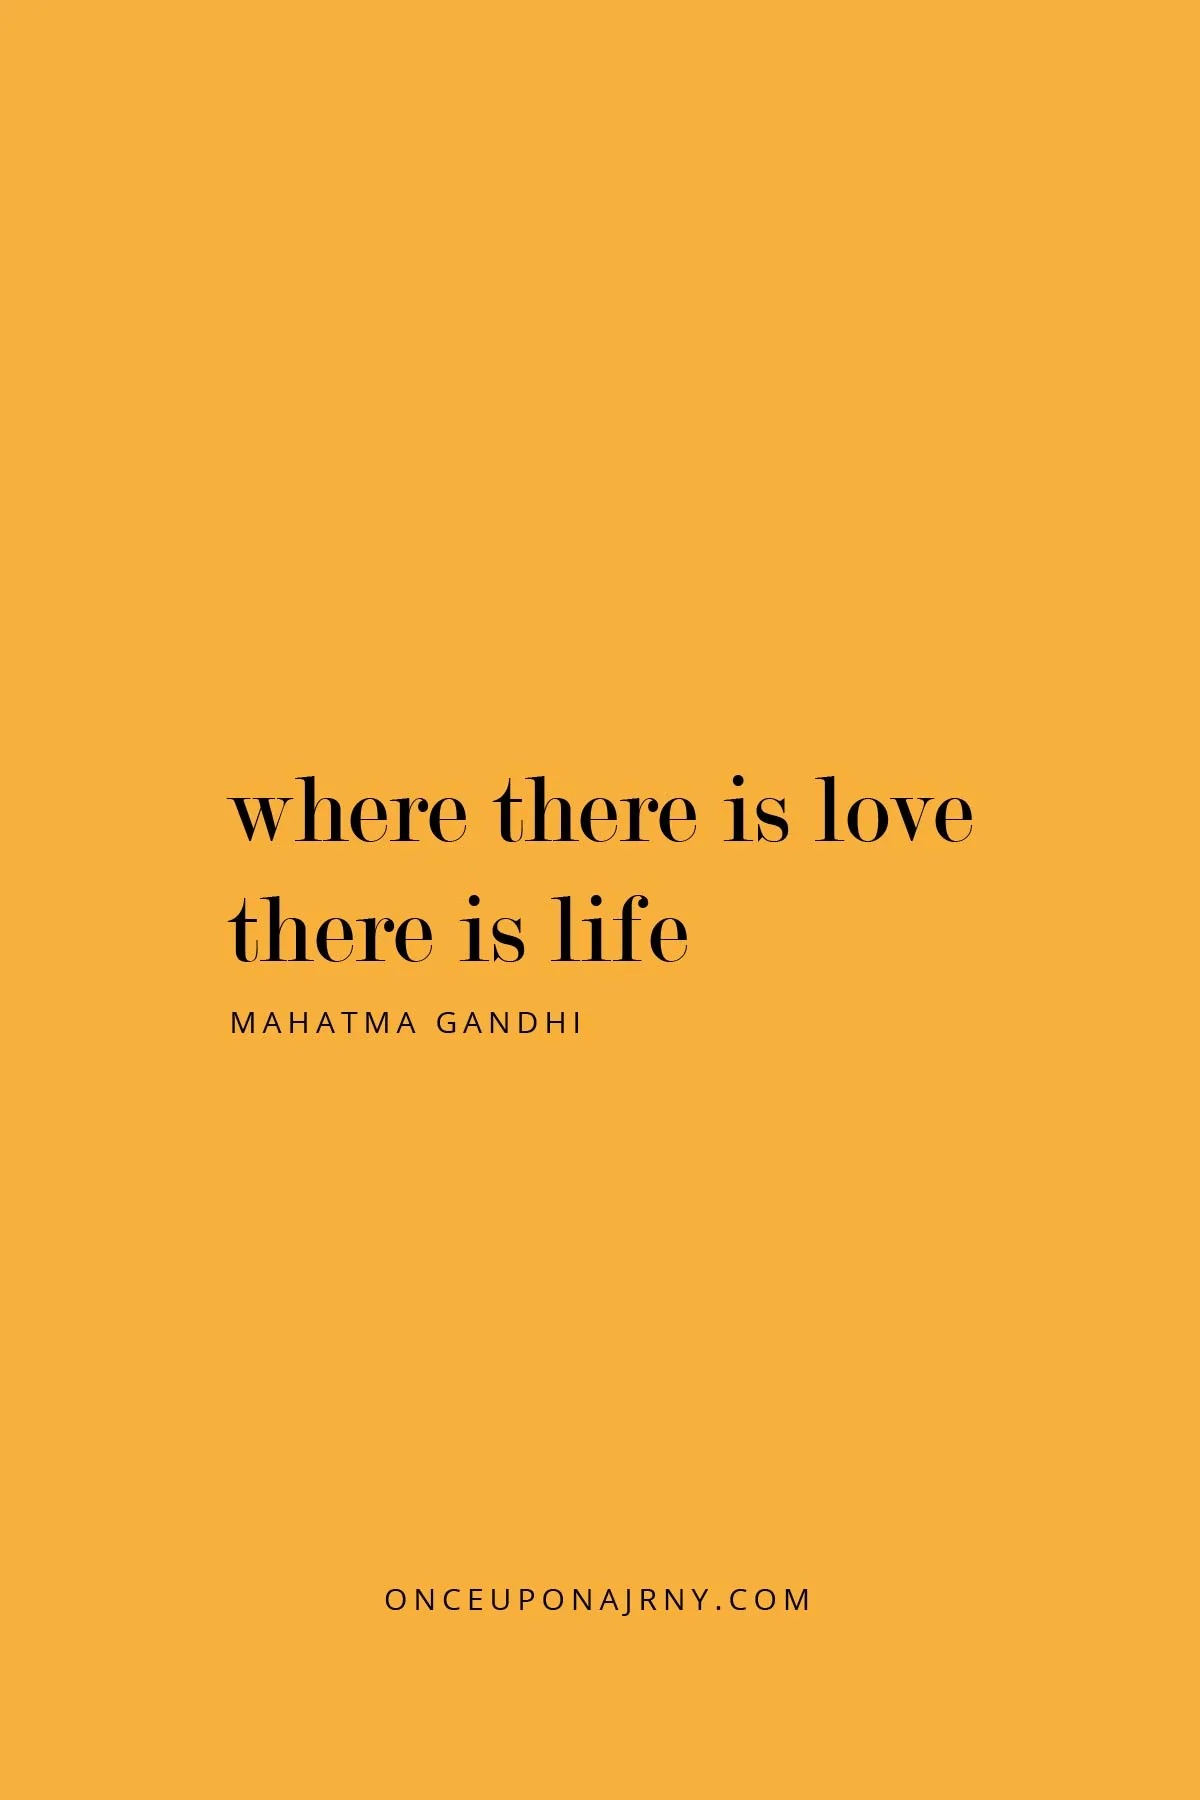 Where there is love, there is life - Mahatma Gandhi lgbtq quotes